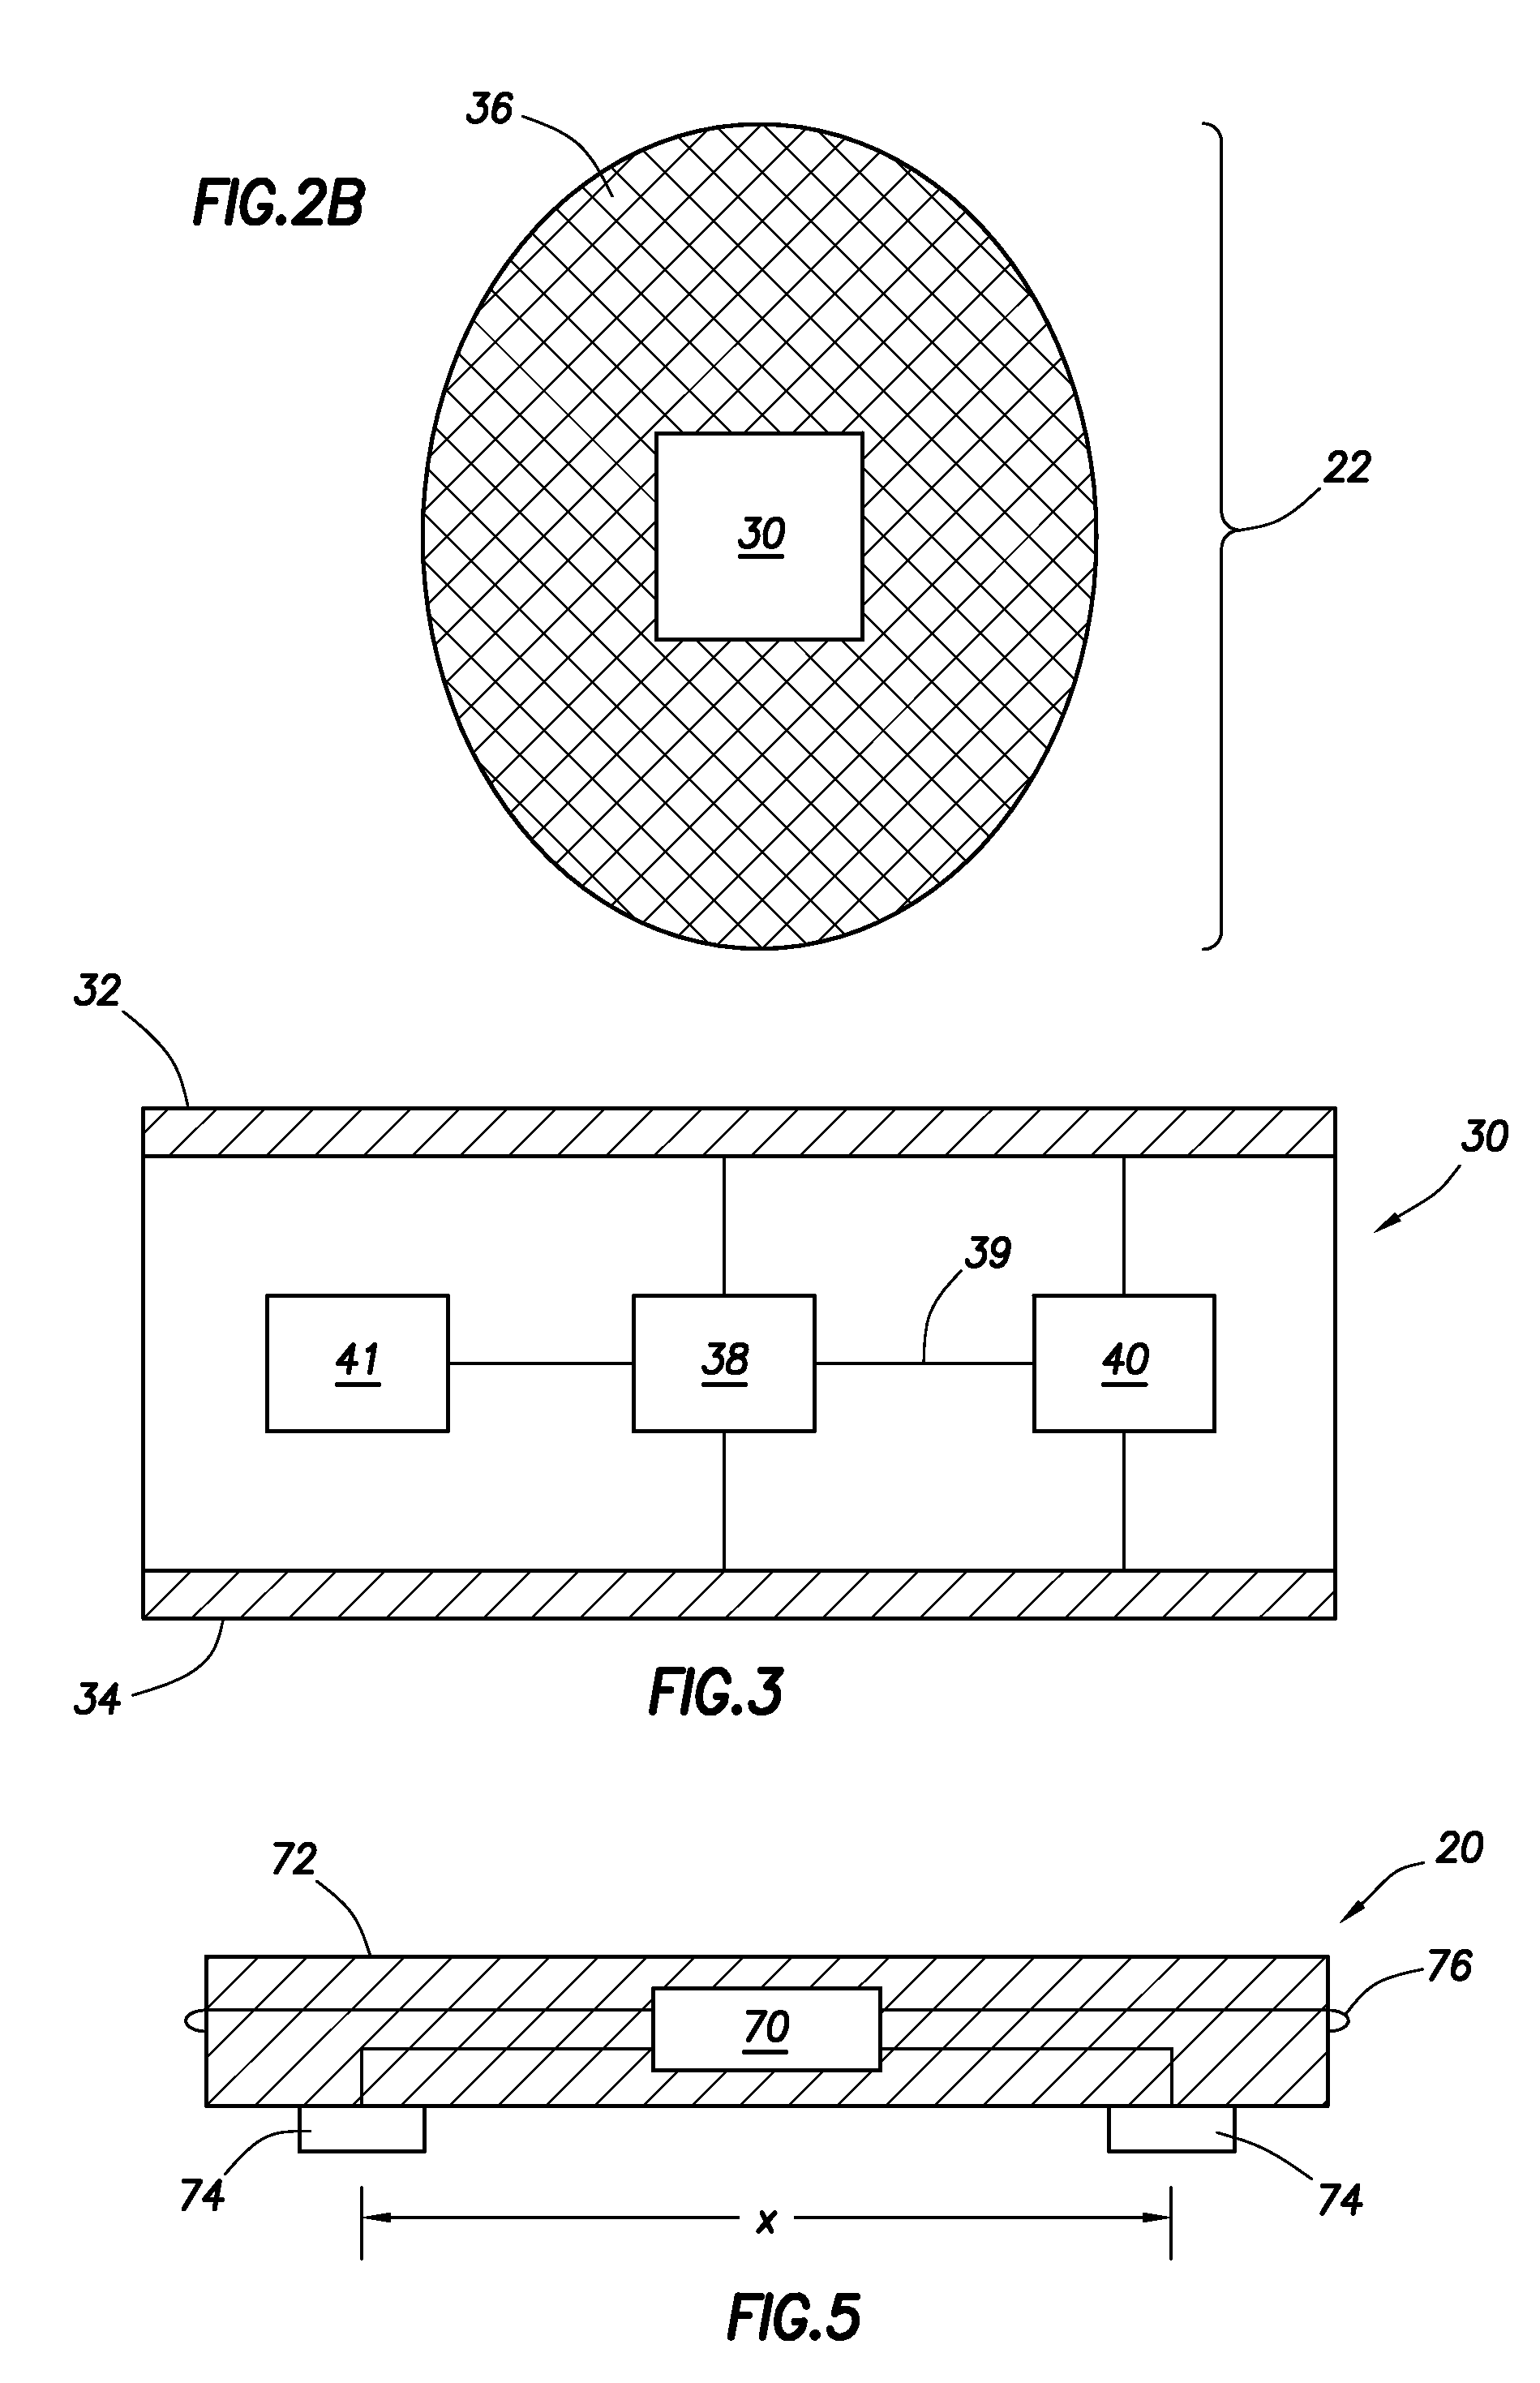 Evaluation of gastrointestinal function using portable electroviscerography systems and methods of using the same